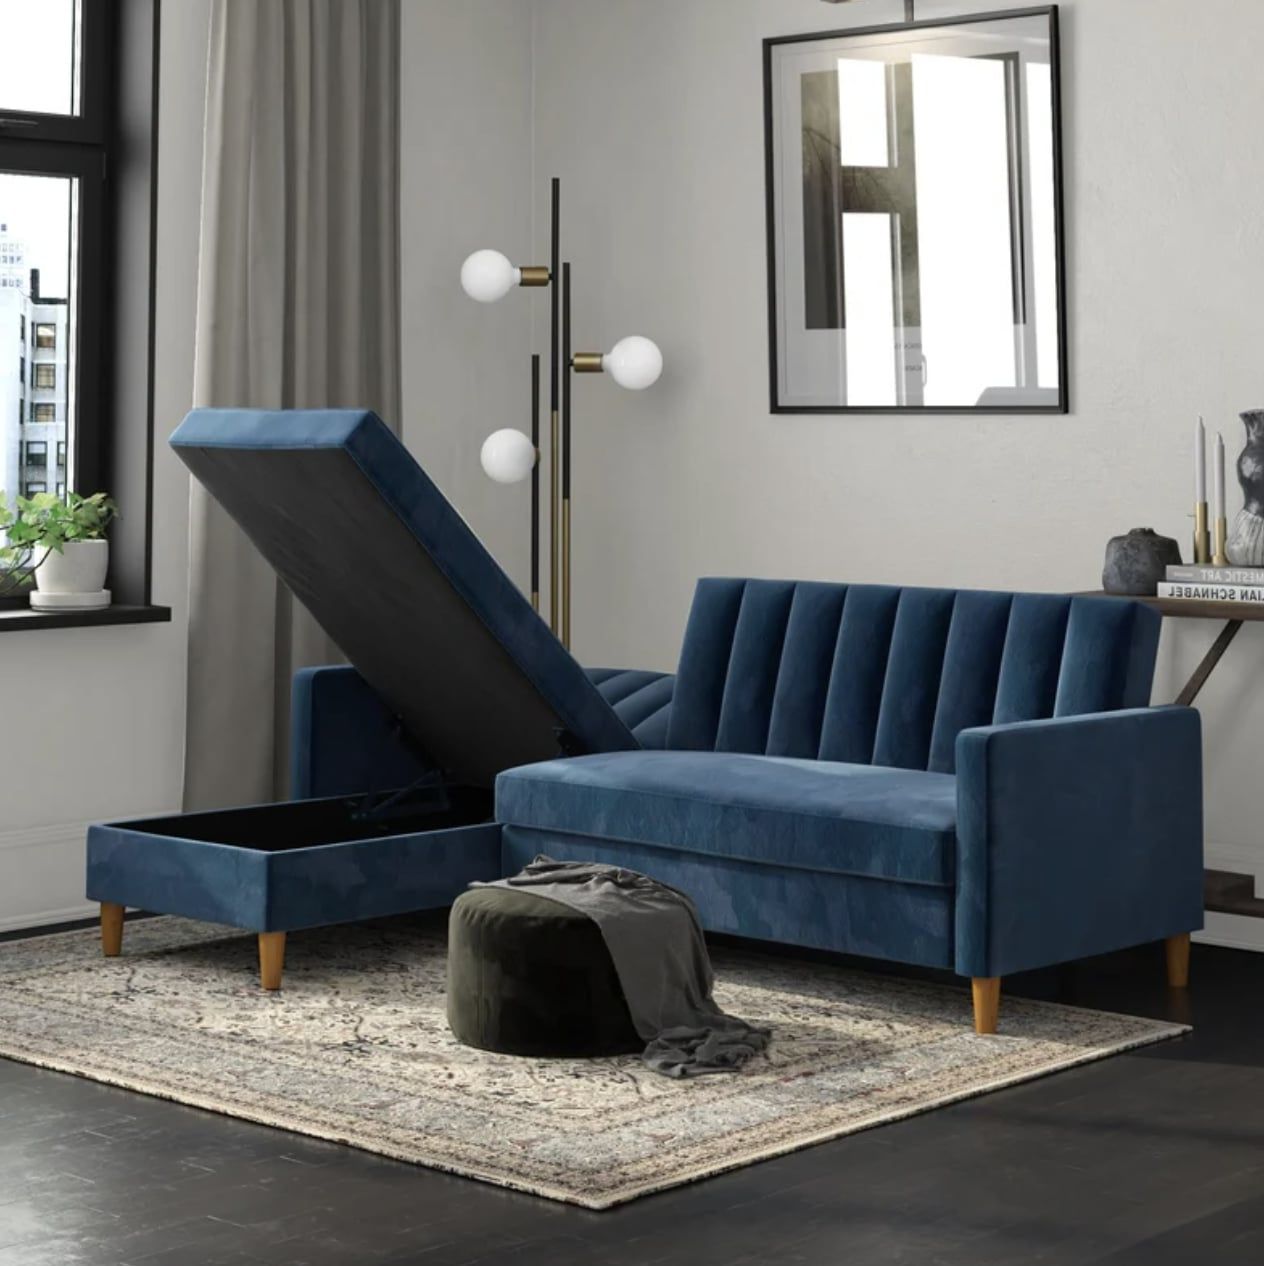 Best And Most Comfortable Sofas With Storage 2022 | Popsugar Home Throughout Convertible Sofas With Matching Chaise (Gallery 7 of 20)